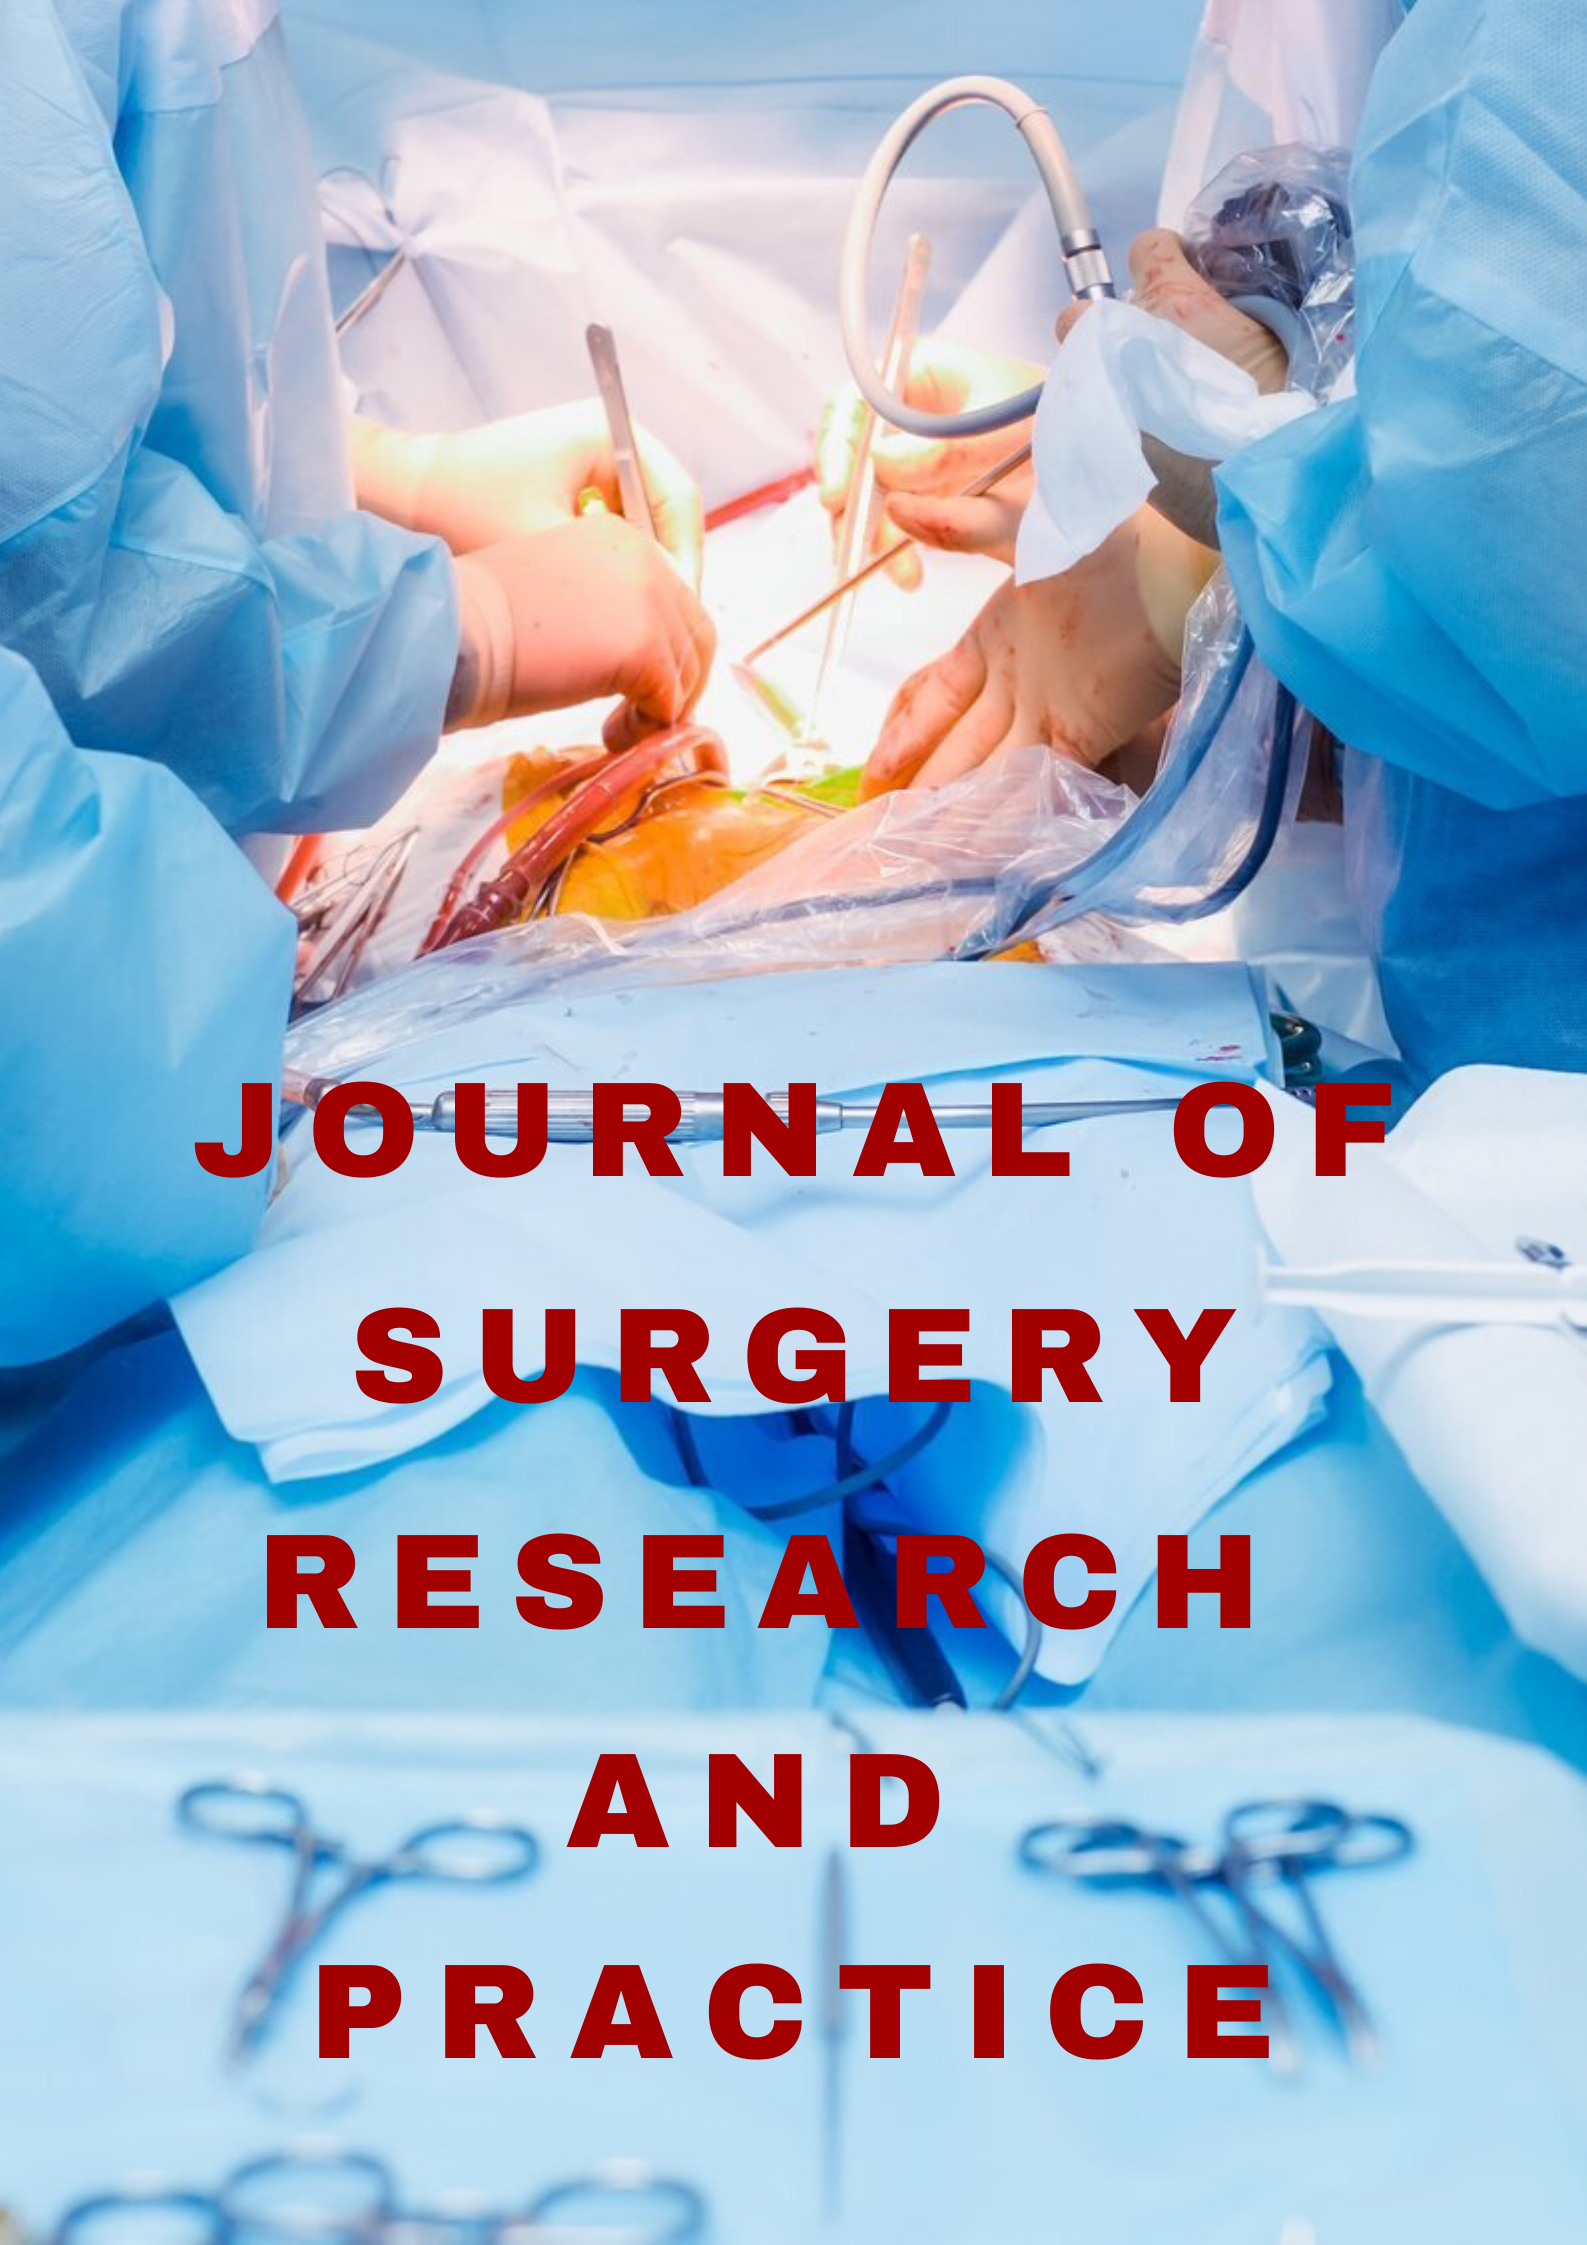 research and practice journal